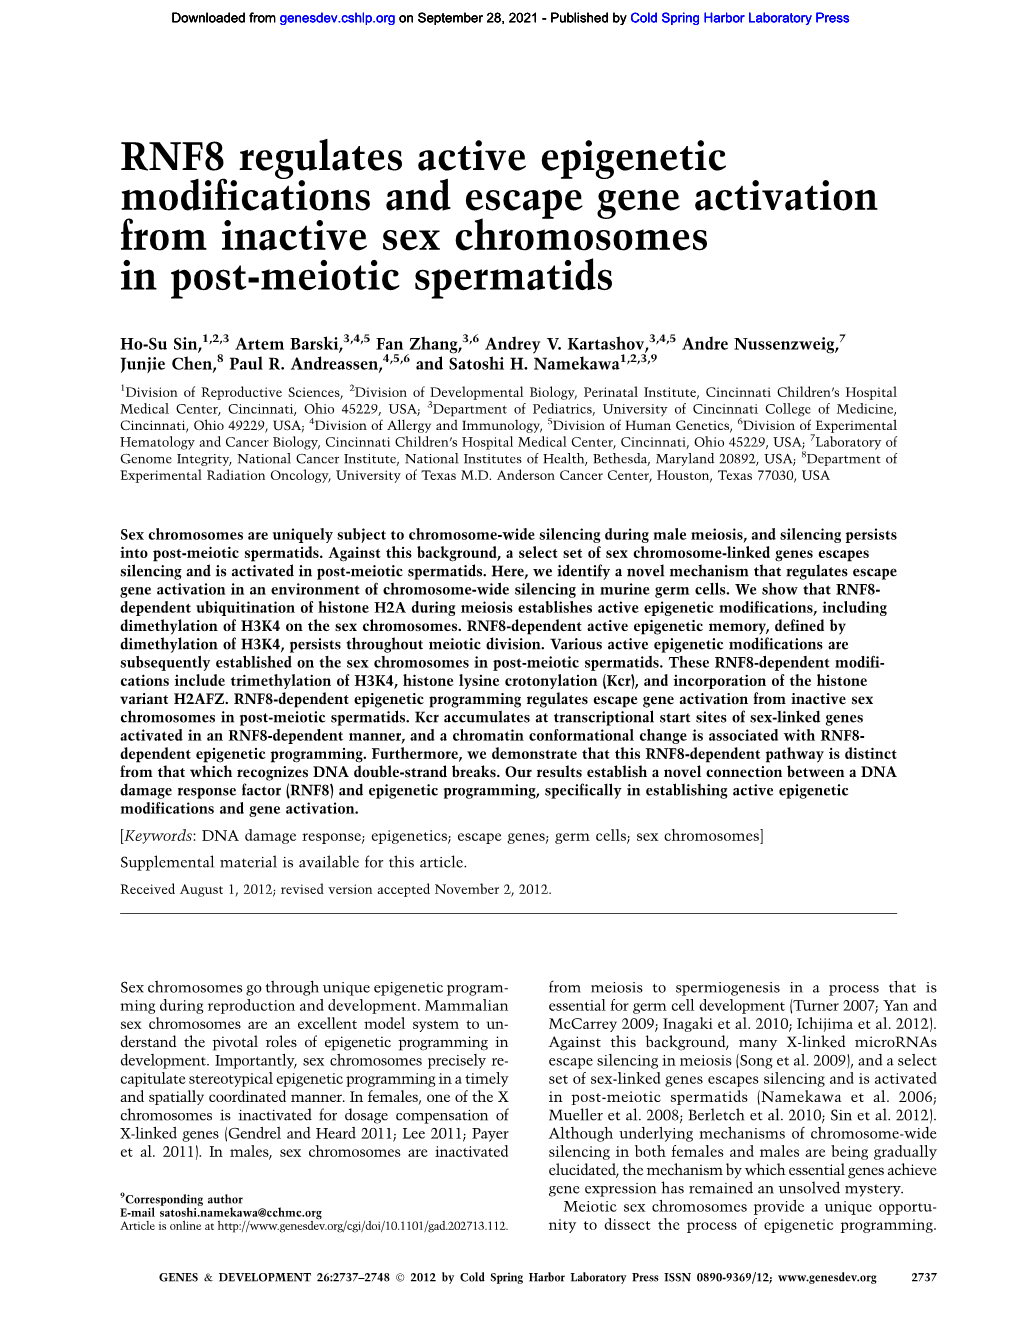 RNF8 Regulates Active Epigenetic Modifications and Escape Gene Activation from Inactive Sex Chromosomes in Post-Meiotic Spermatids